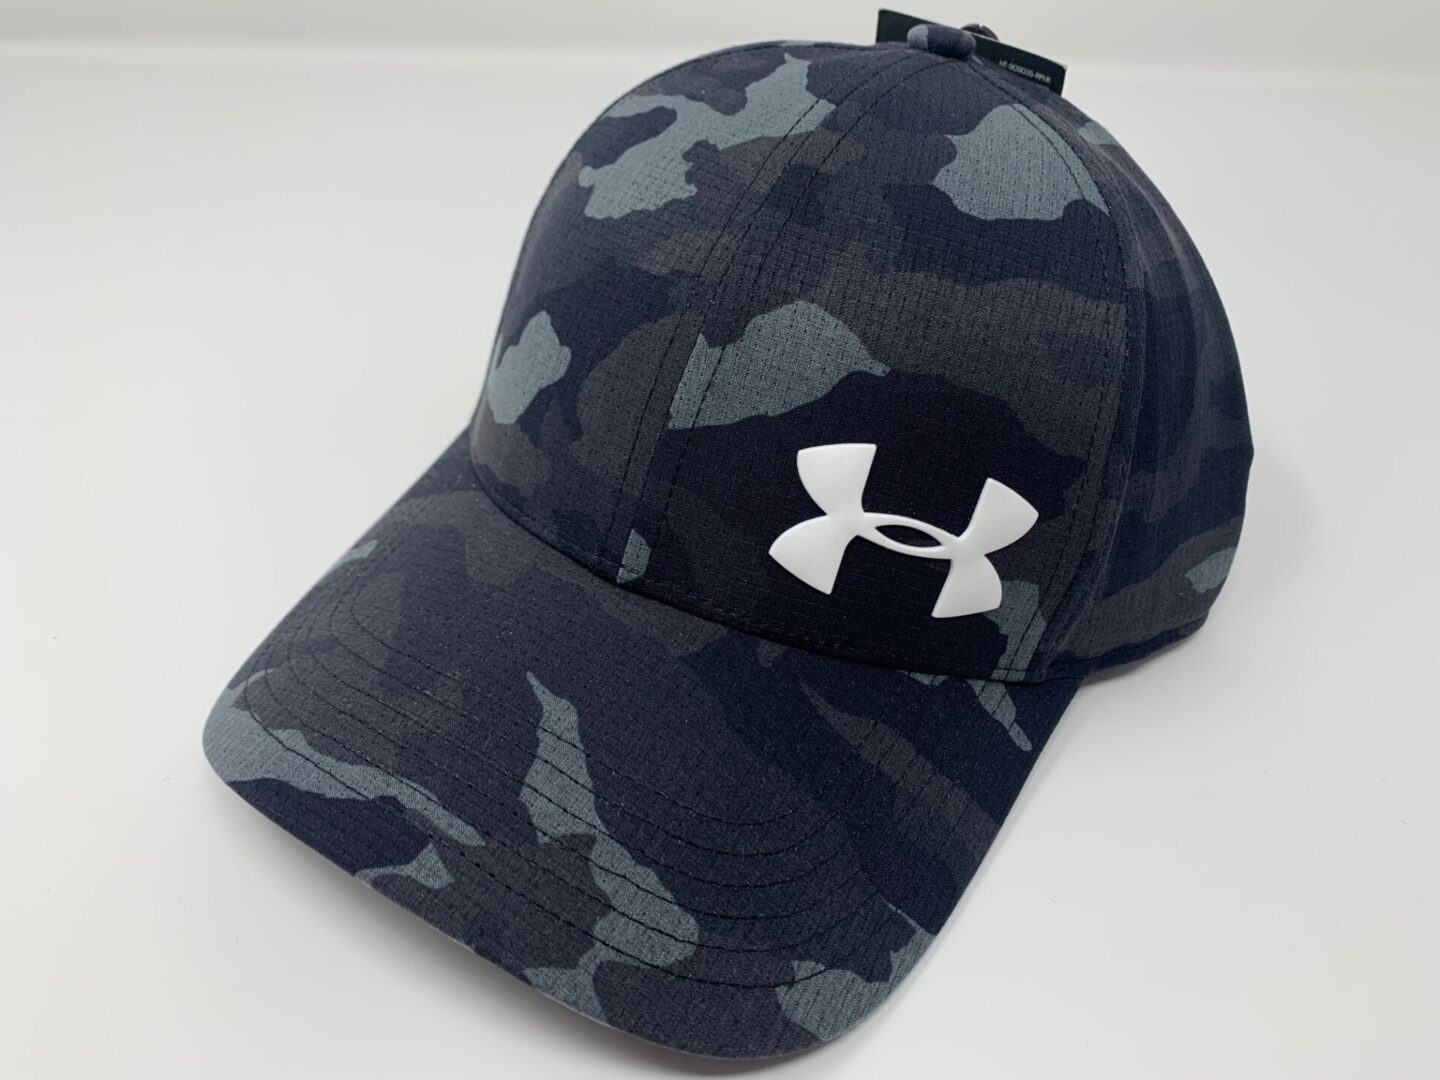 NEW Under Armour [L/XL] Men's Camo Fitted Hat-Grey Camo 1291857-007